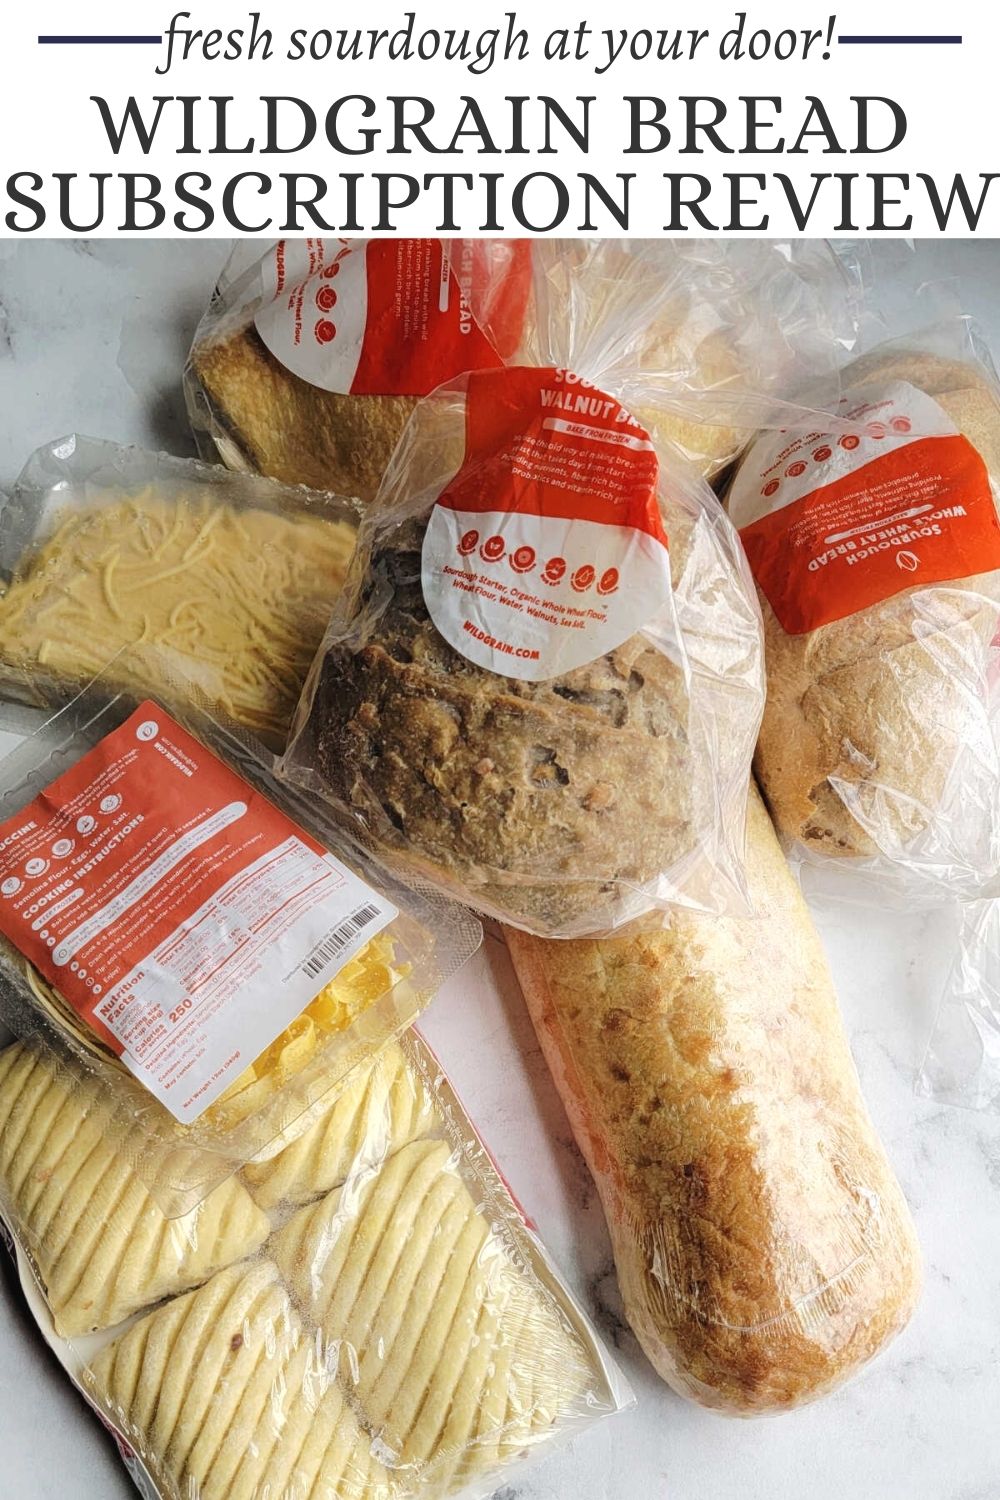 Wildgrain is a bread and pasta subscription service that delivers sourdough bread, fresh pasta and artisan pastries to your door. It is an easy way to get fresh bread from small bakeries on your table.